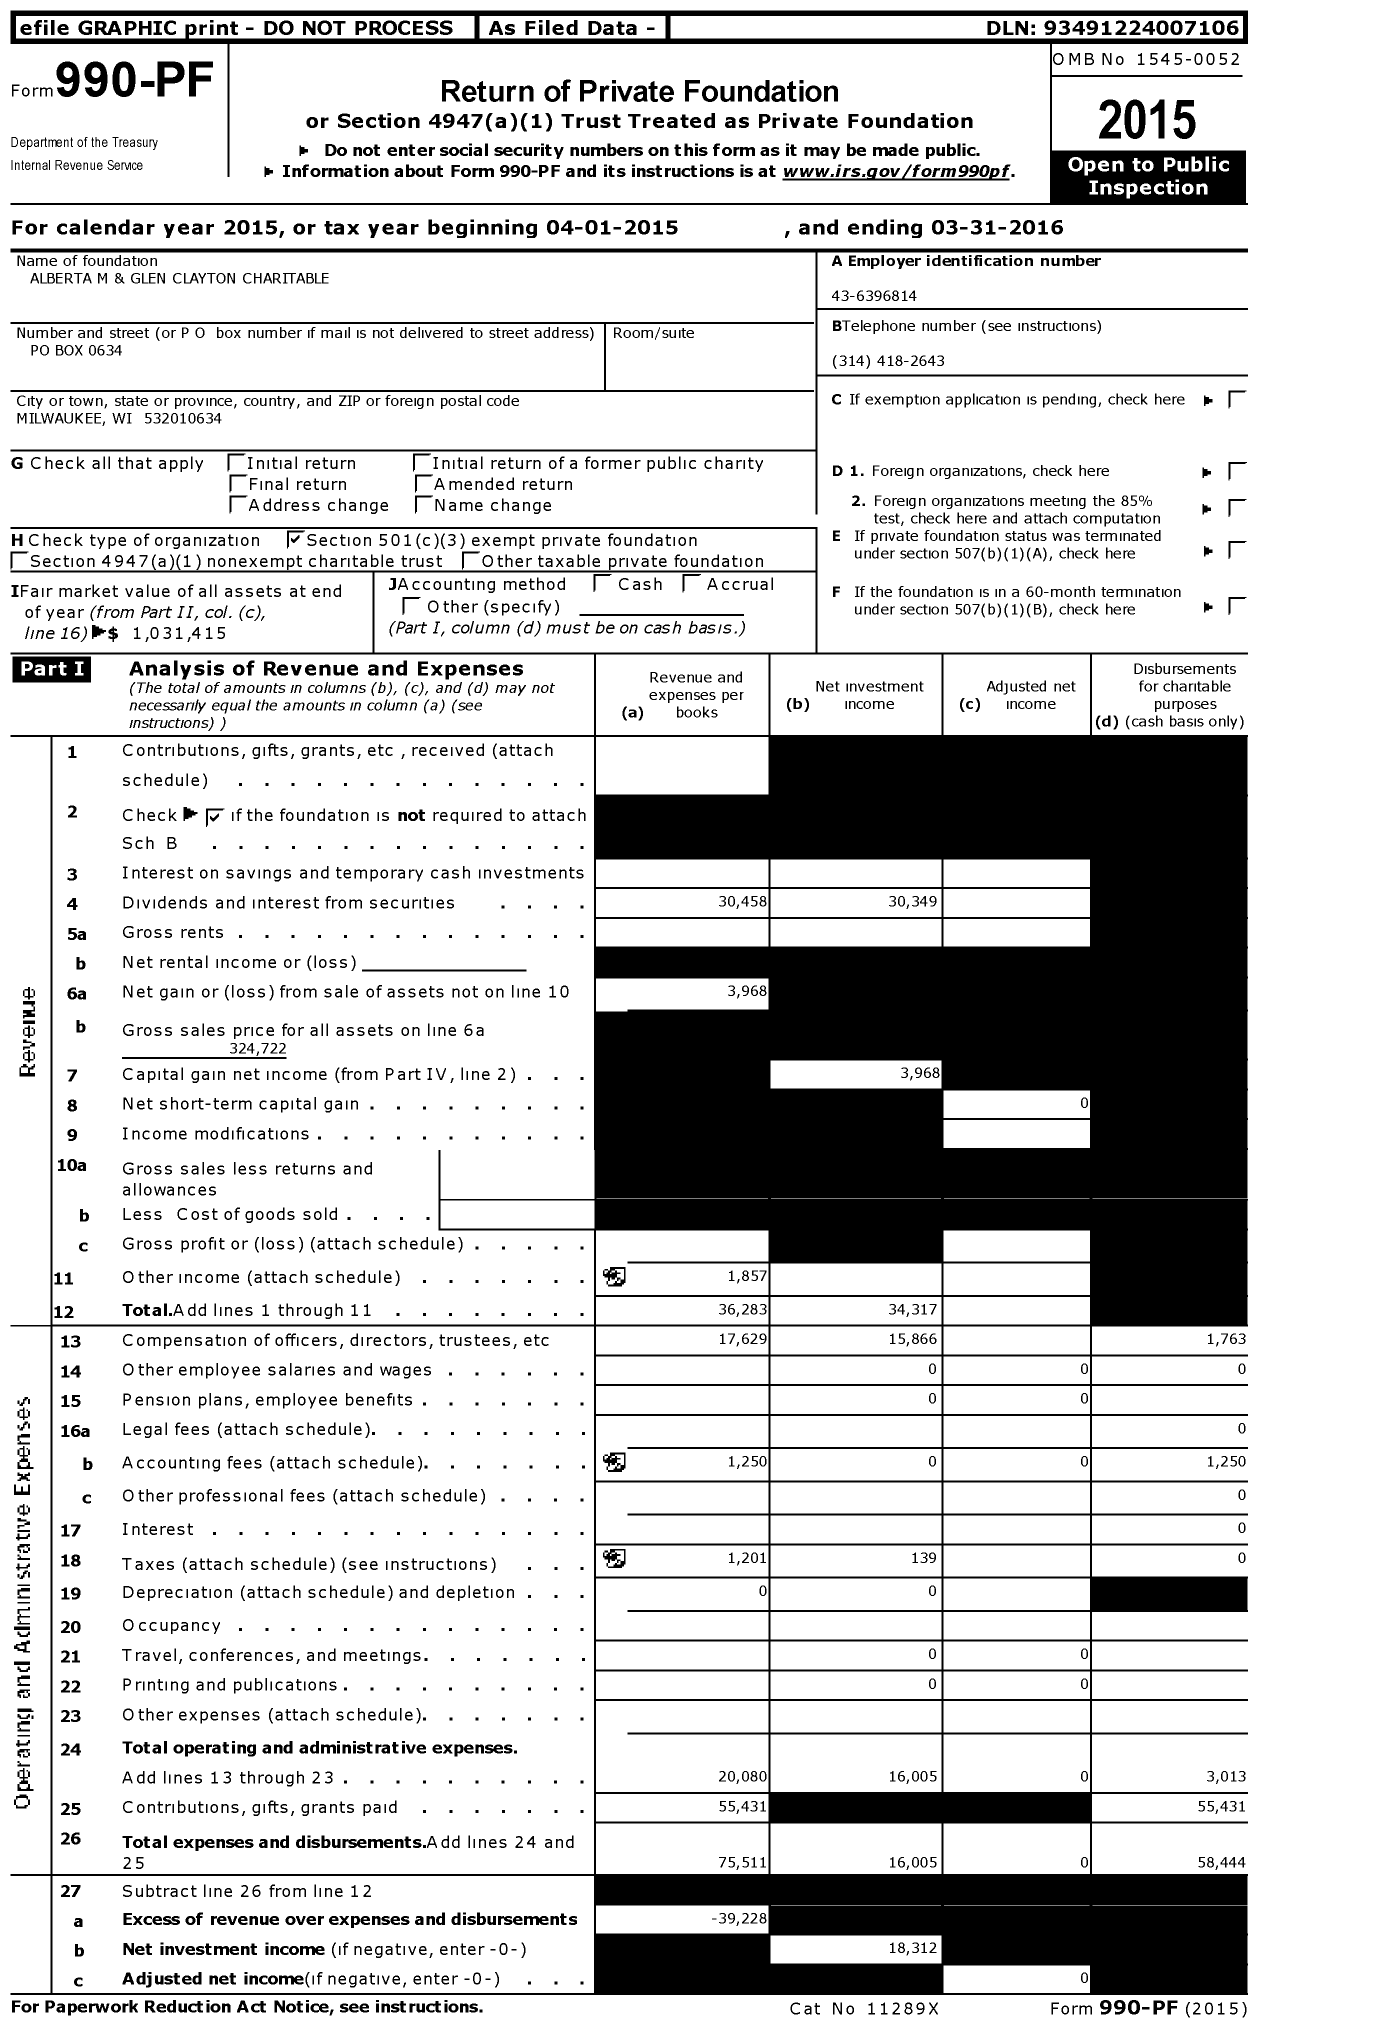 Image of first page of 2015 Form 990PF for Alberta M and Glen Clayton Charitable